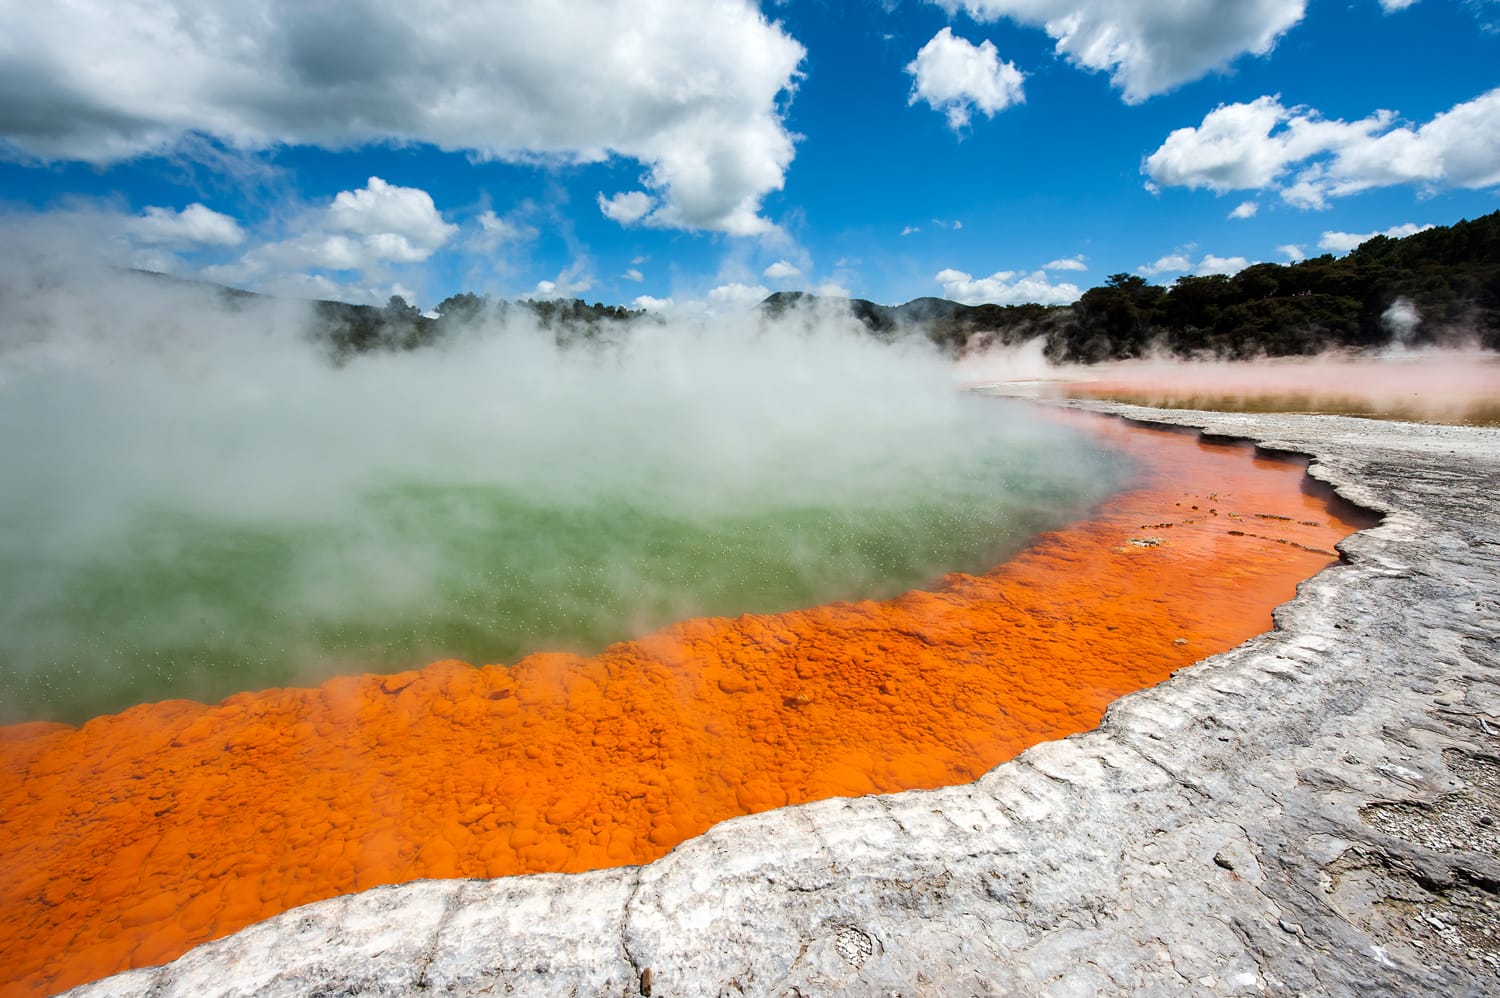 Frying pan lake is the largest hot water spring in the world. Rotorua, Waimangu geothermal area, New Zealand